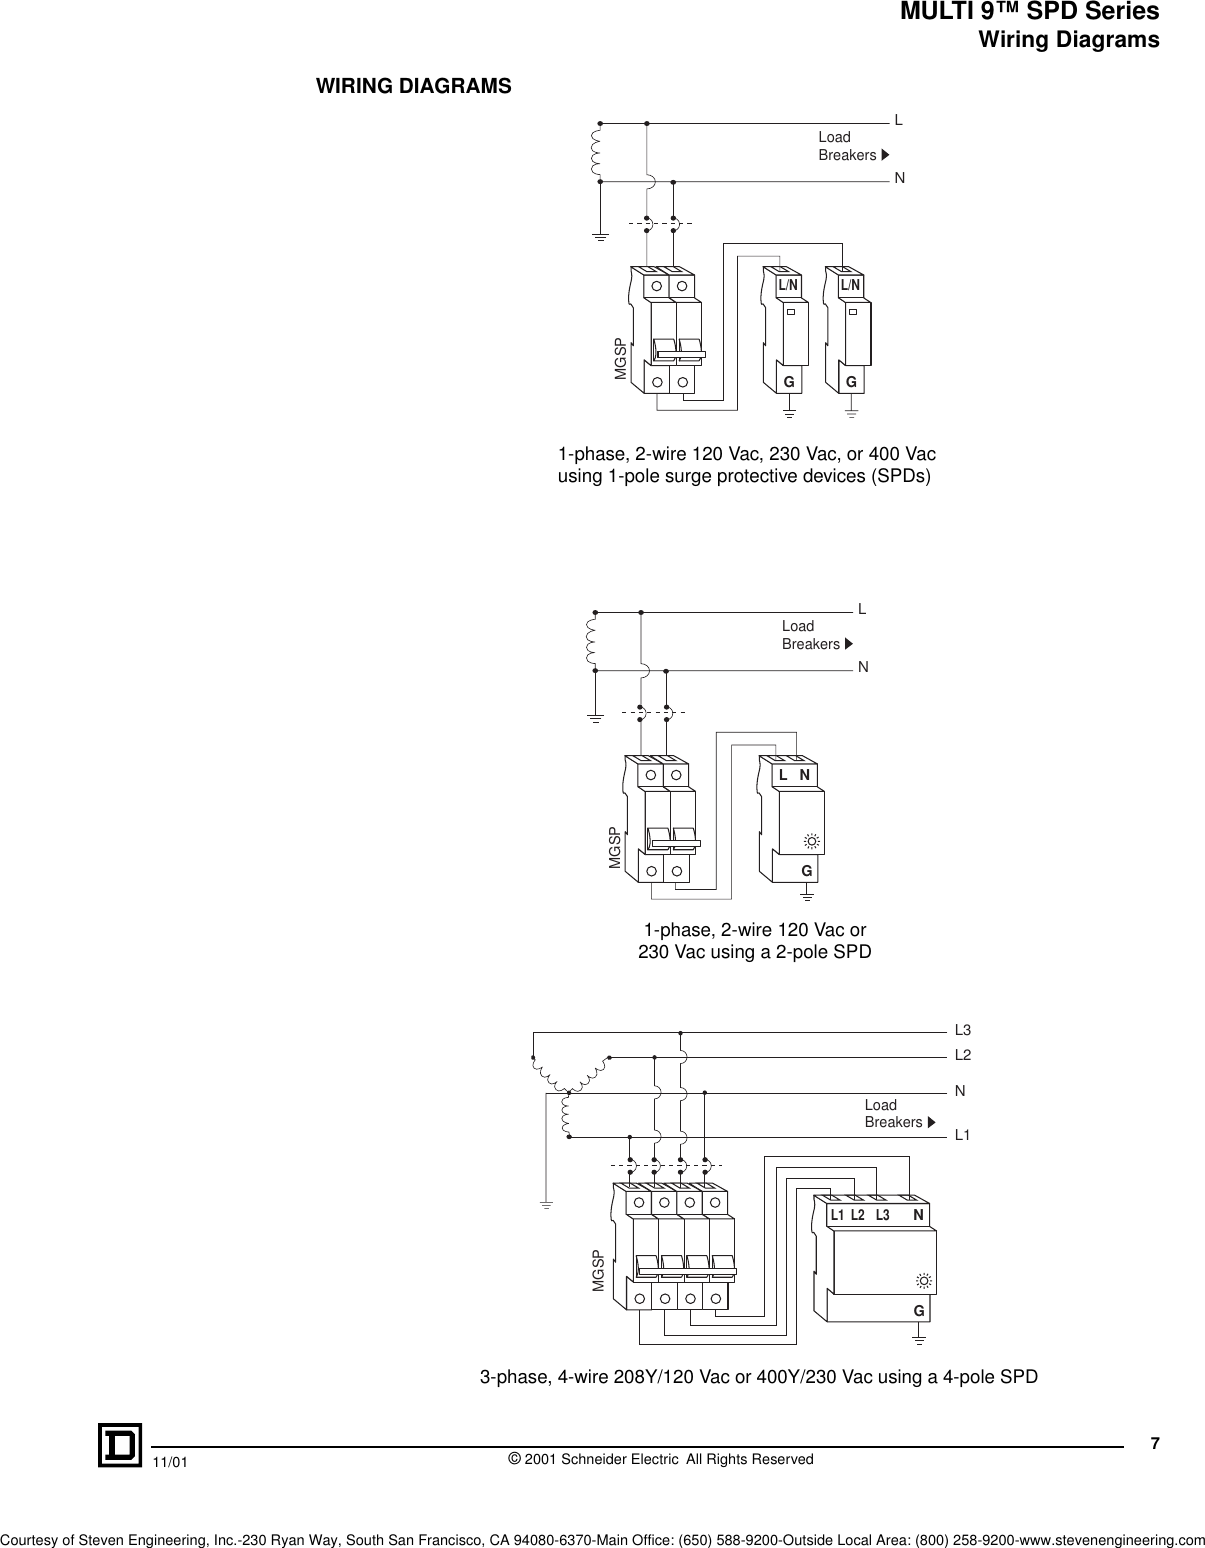 Page 7 of 8 - Surge Protective Device Transient Voltage Suppressor (TVSS) MULTI 9 SPD Series